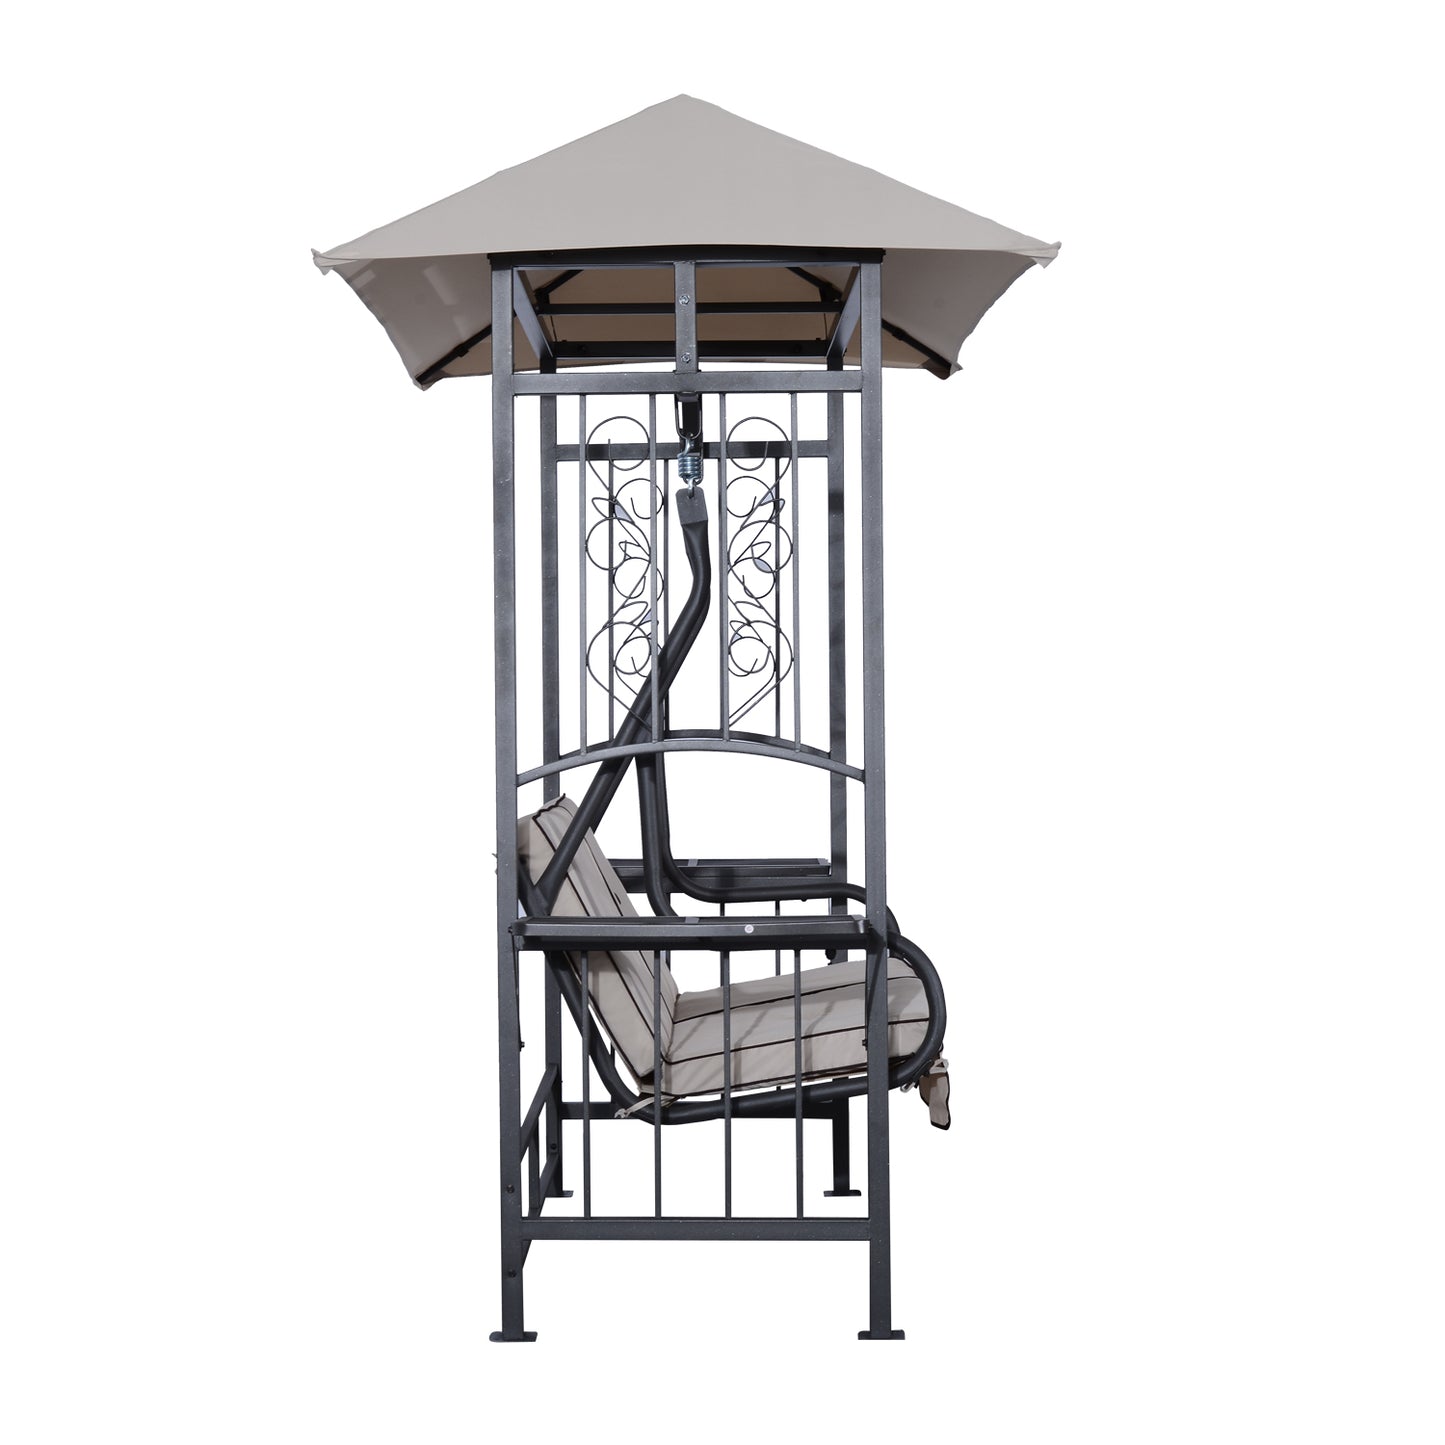 Outsunny Garden Texteline 2 Person Swing Chair-Beige